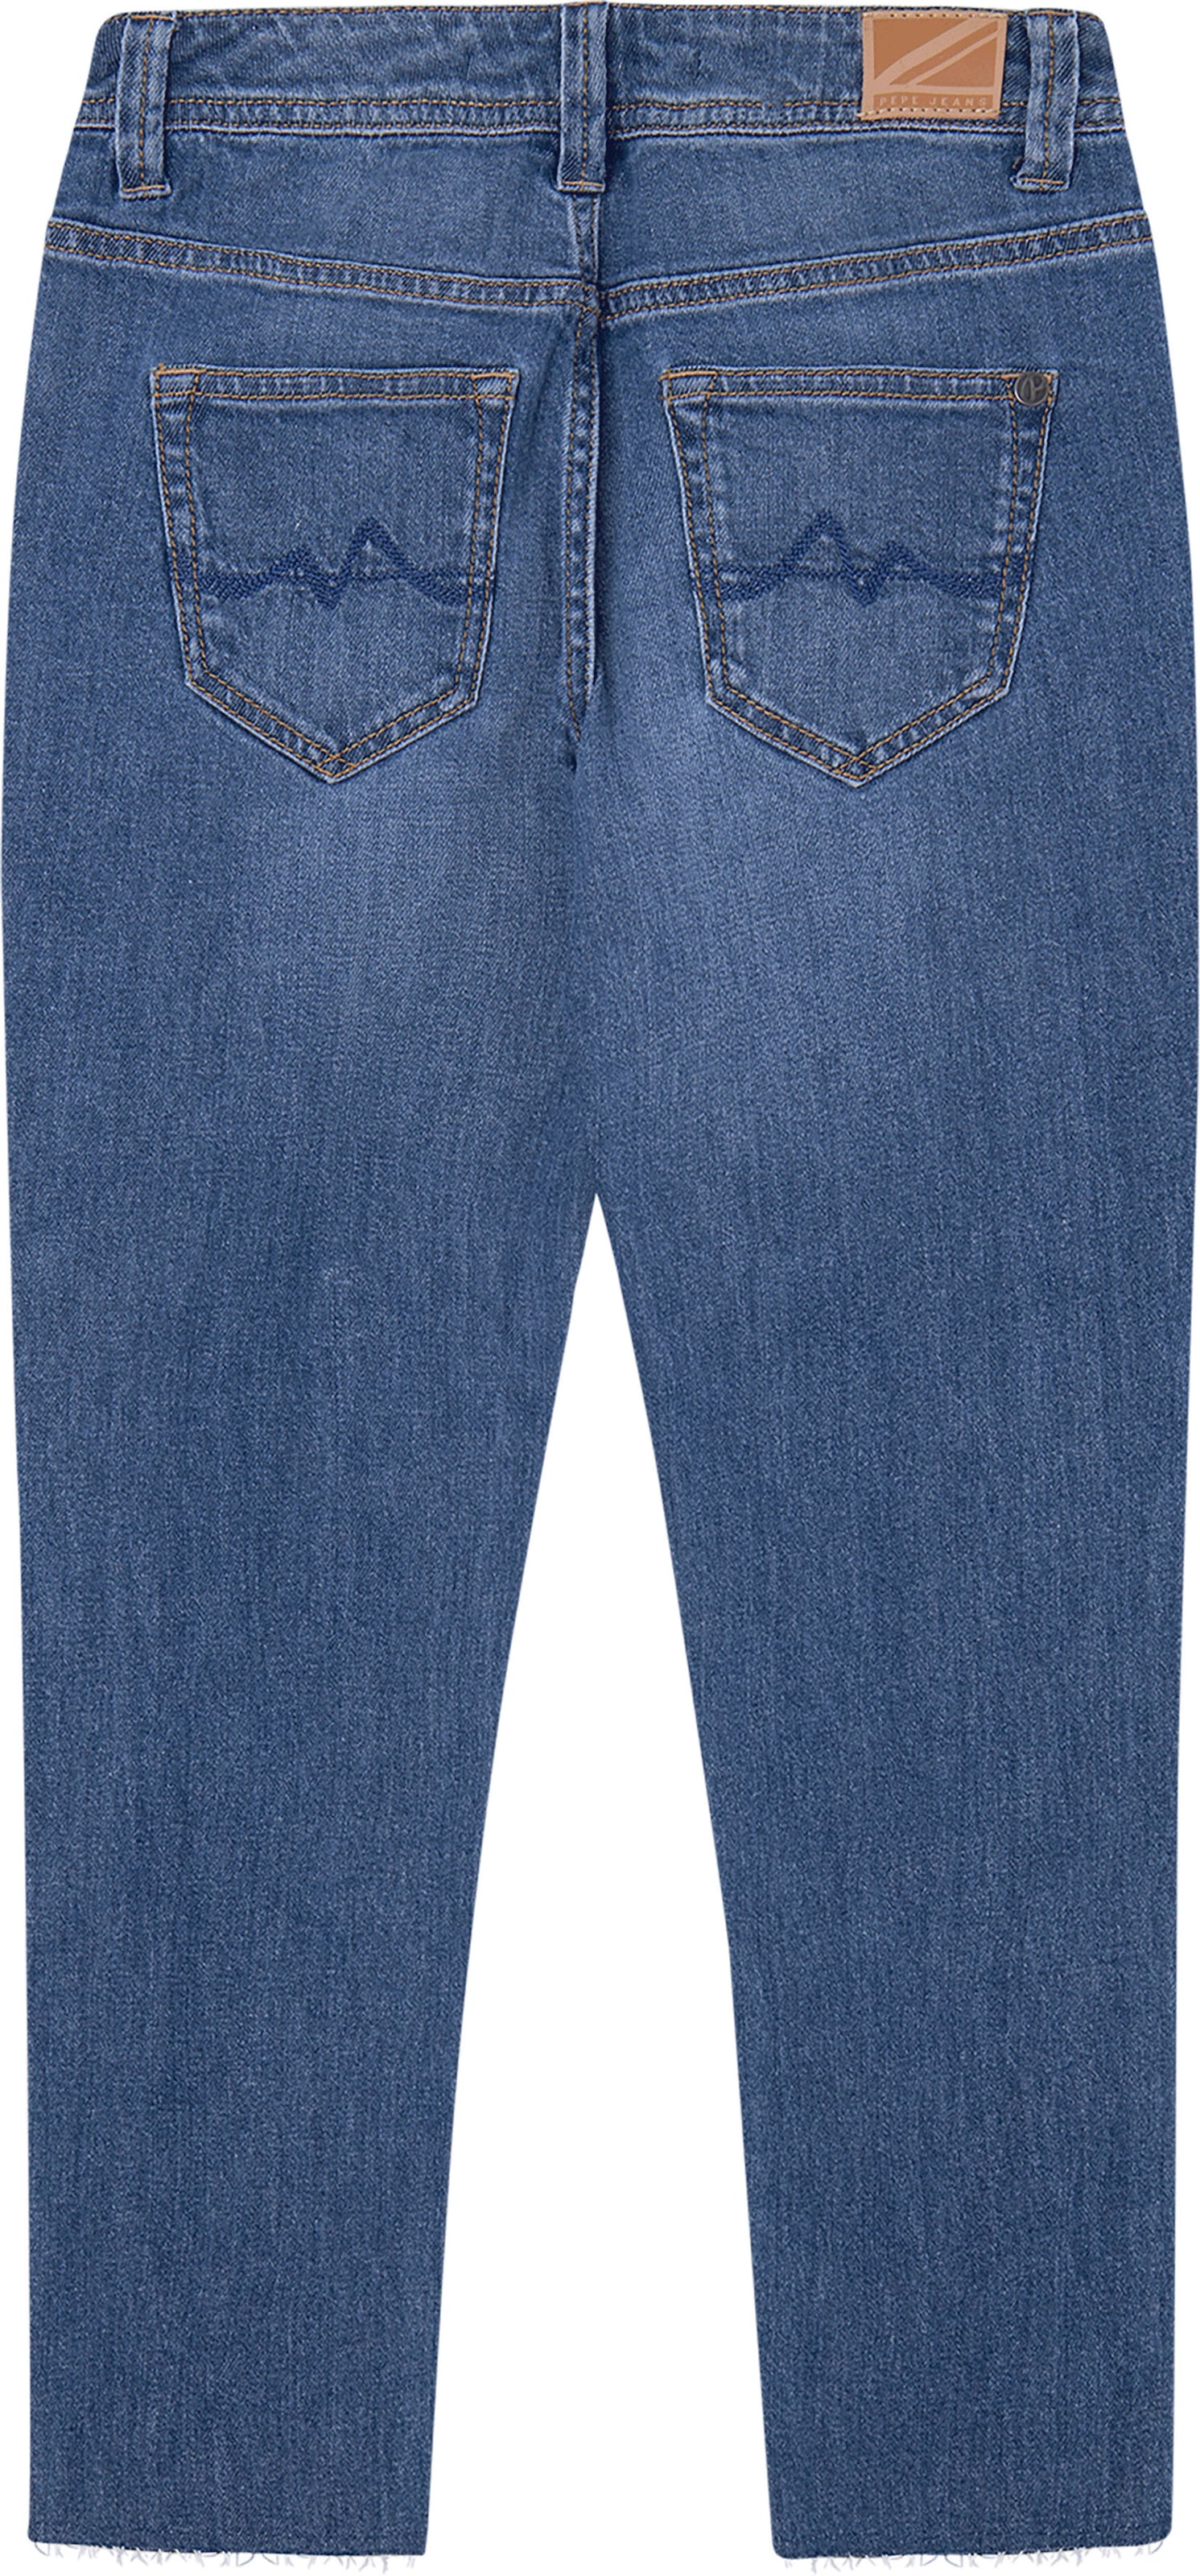 bei Pepe 5-Pocket-Jeans OTTO »Violet« Jeans online